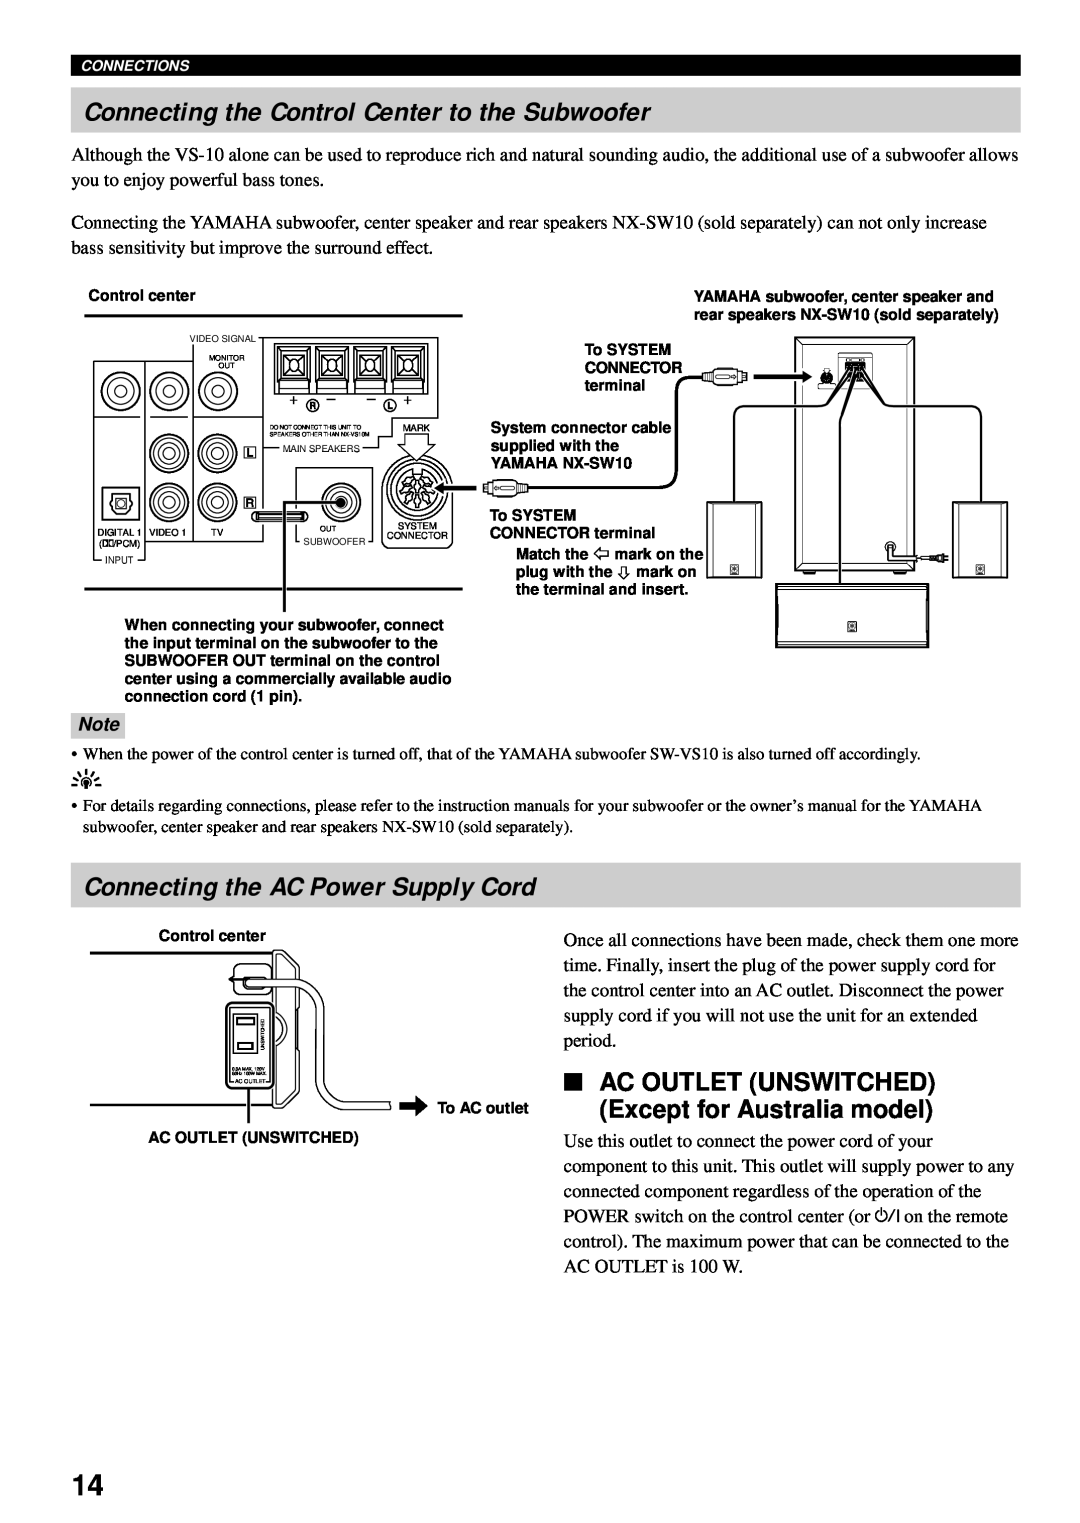 Yamaha VS-10 owner manual Connecting the Control Center to the Subwoofer, Connecting the AC Power Supply Cord 